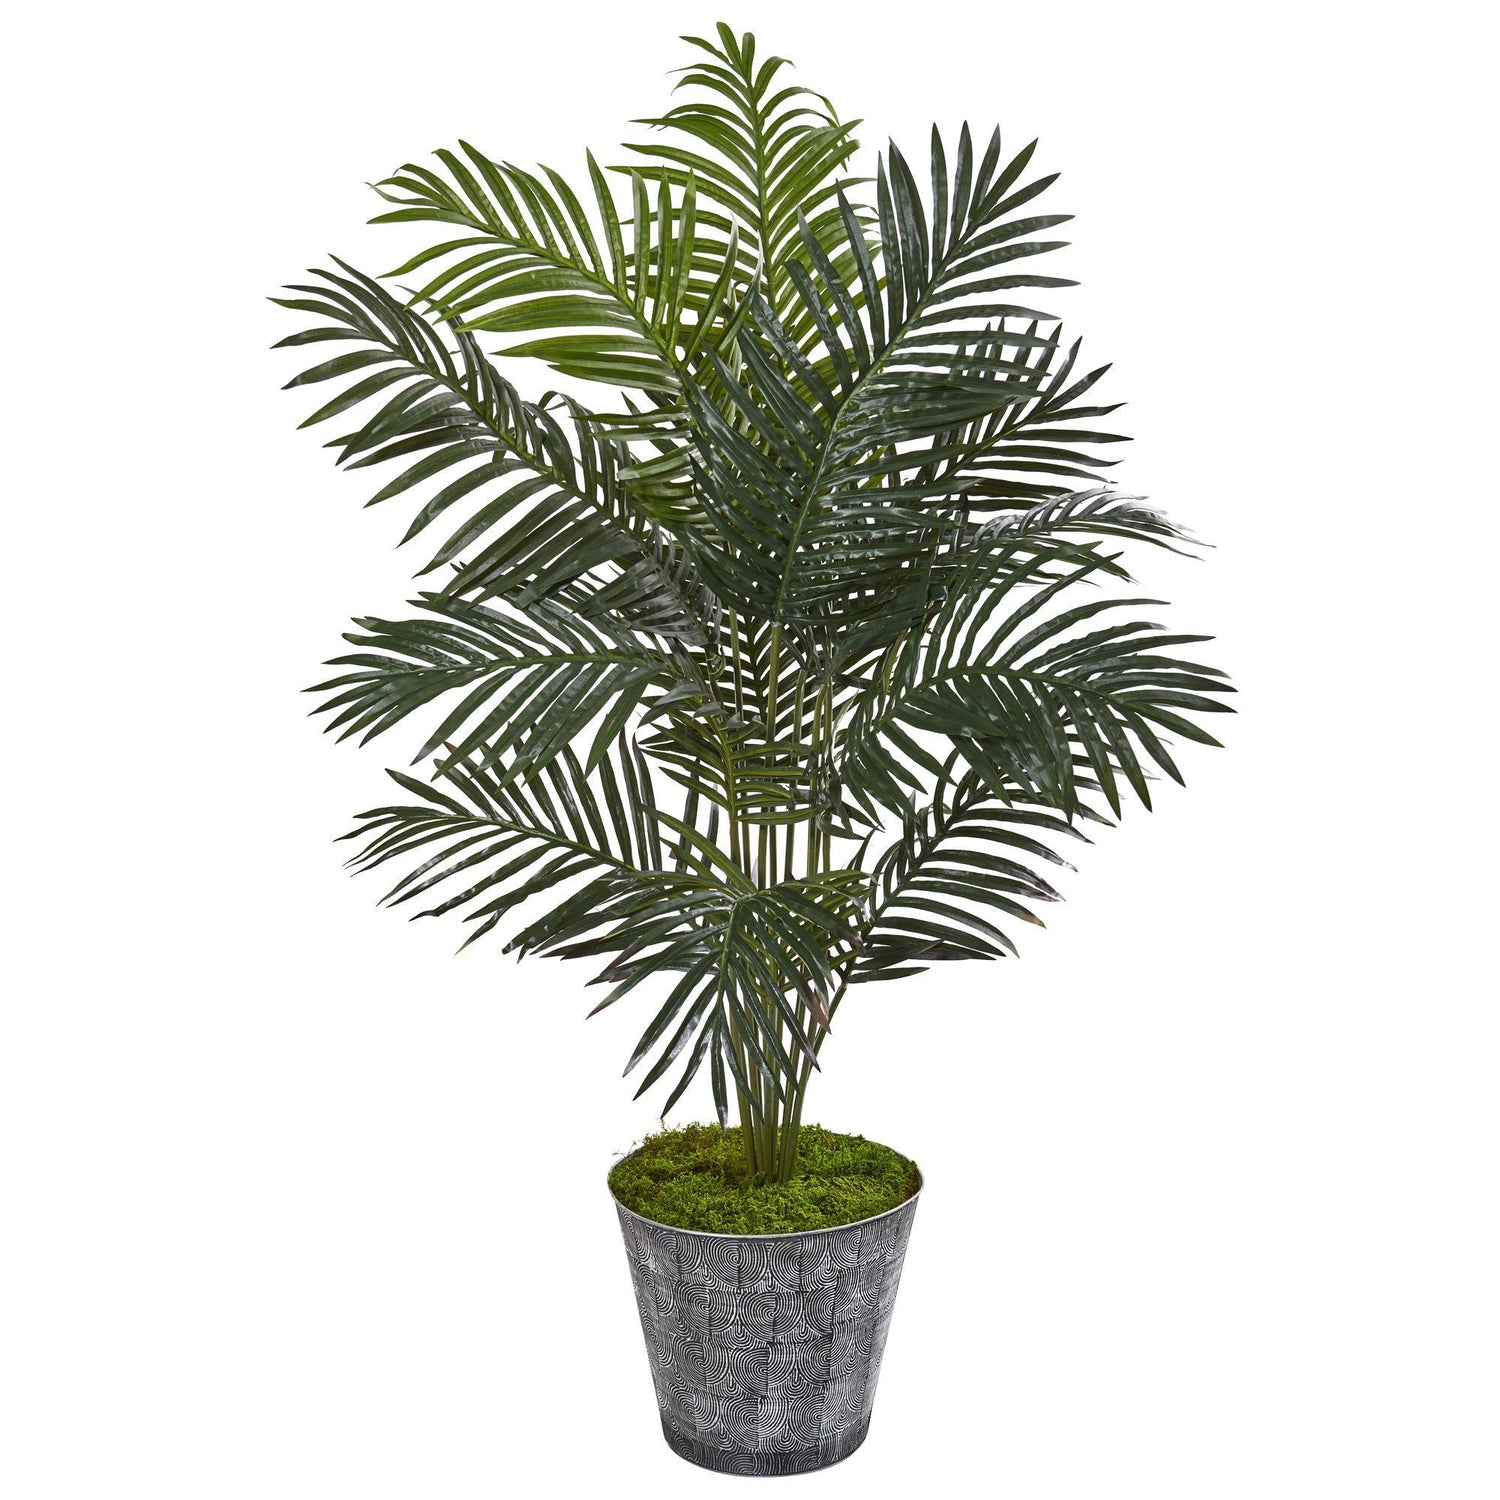 58” Paradise Palm Artificial Tree in Decorative Planter